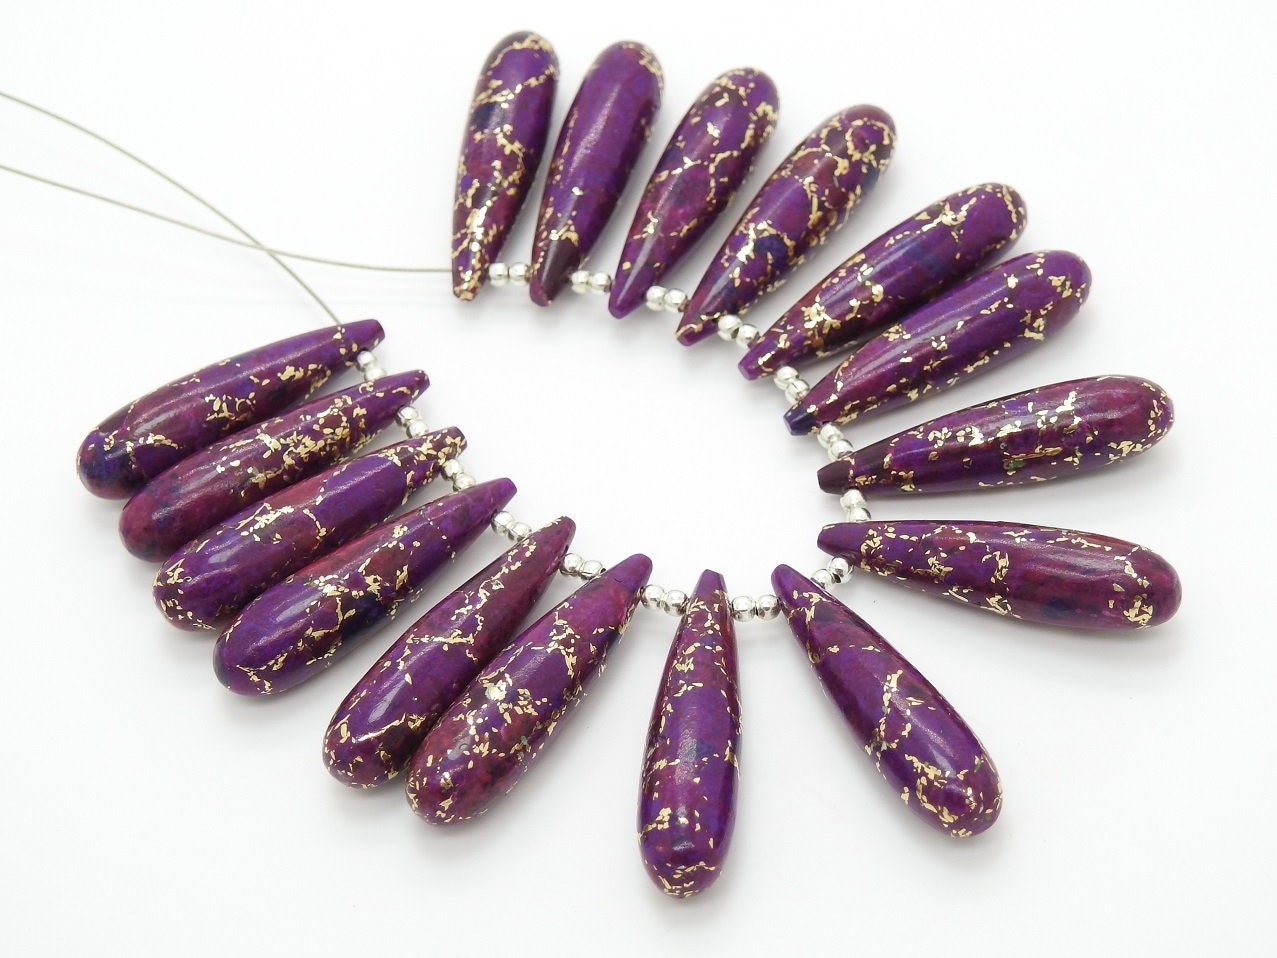 35MM Long Pair,Purple Copper Turquoise Smooth Elongated Drop,Teardrop,Loose Stone,For Making Earrings,Wholesale Price New Arrival PME-CY3 | Save 33% - Rajasthan Living 15